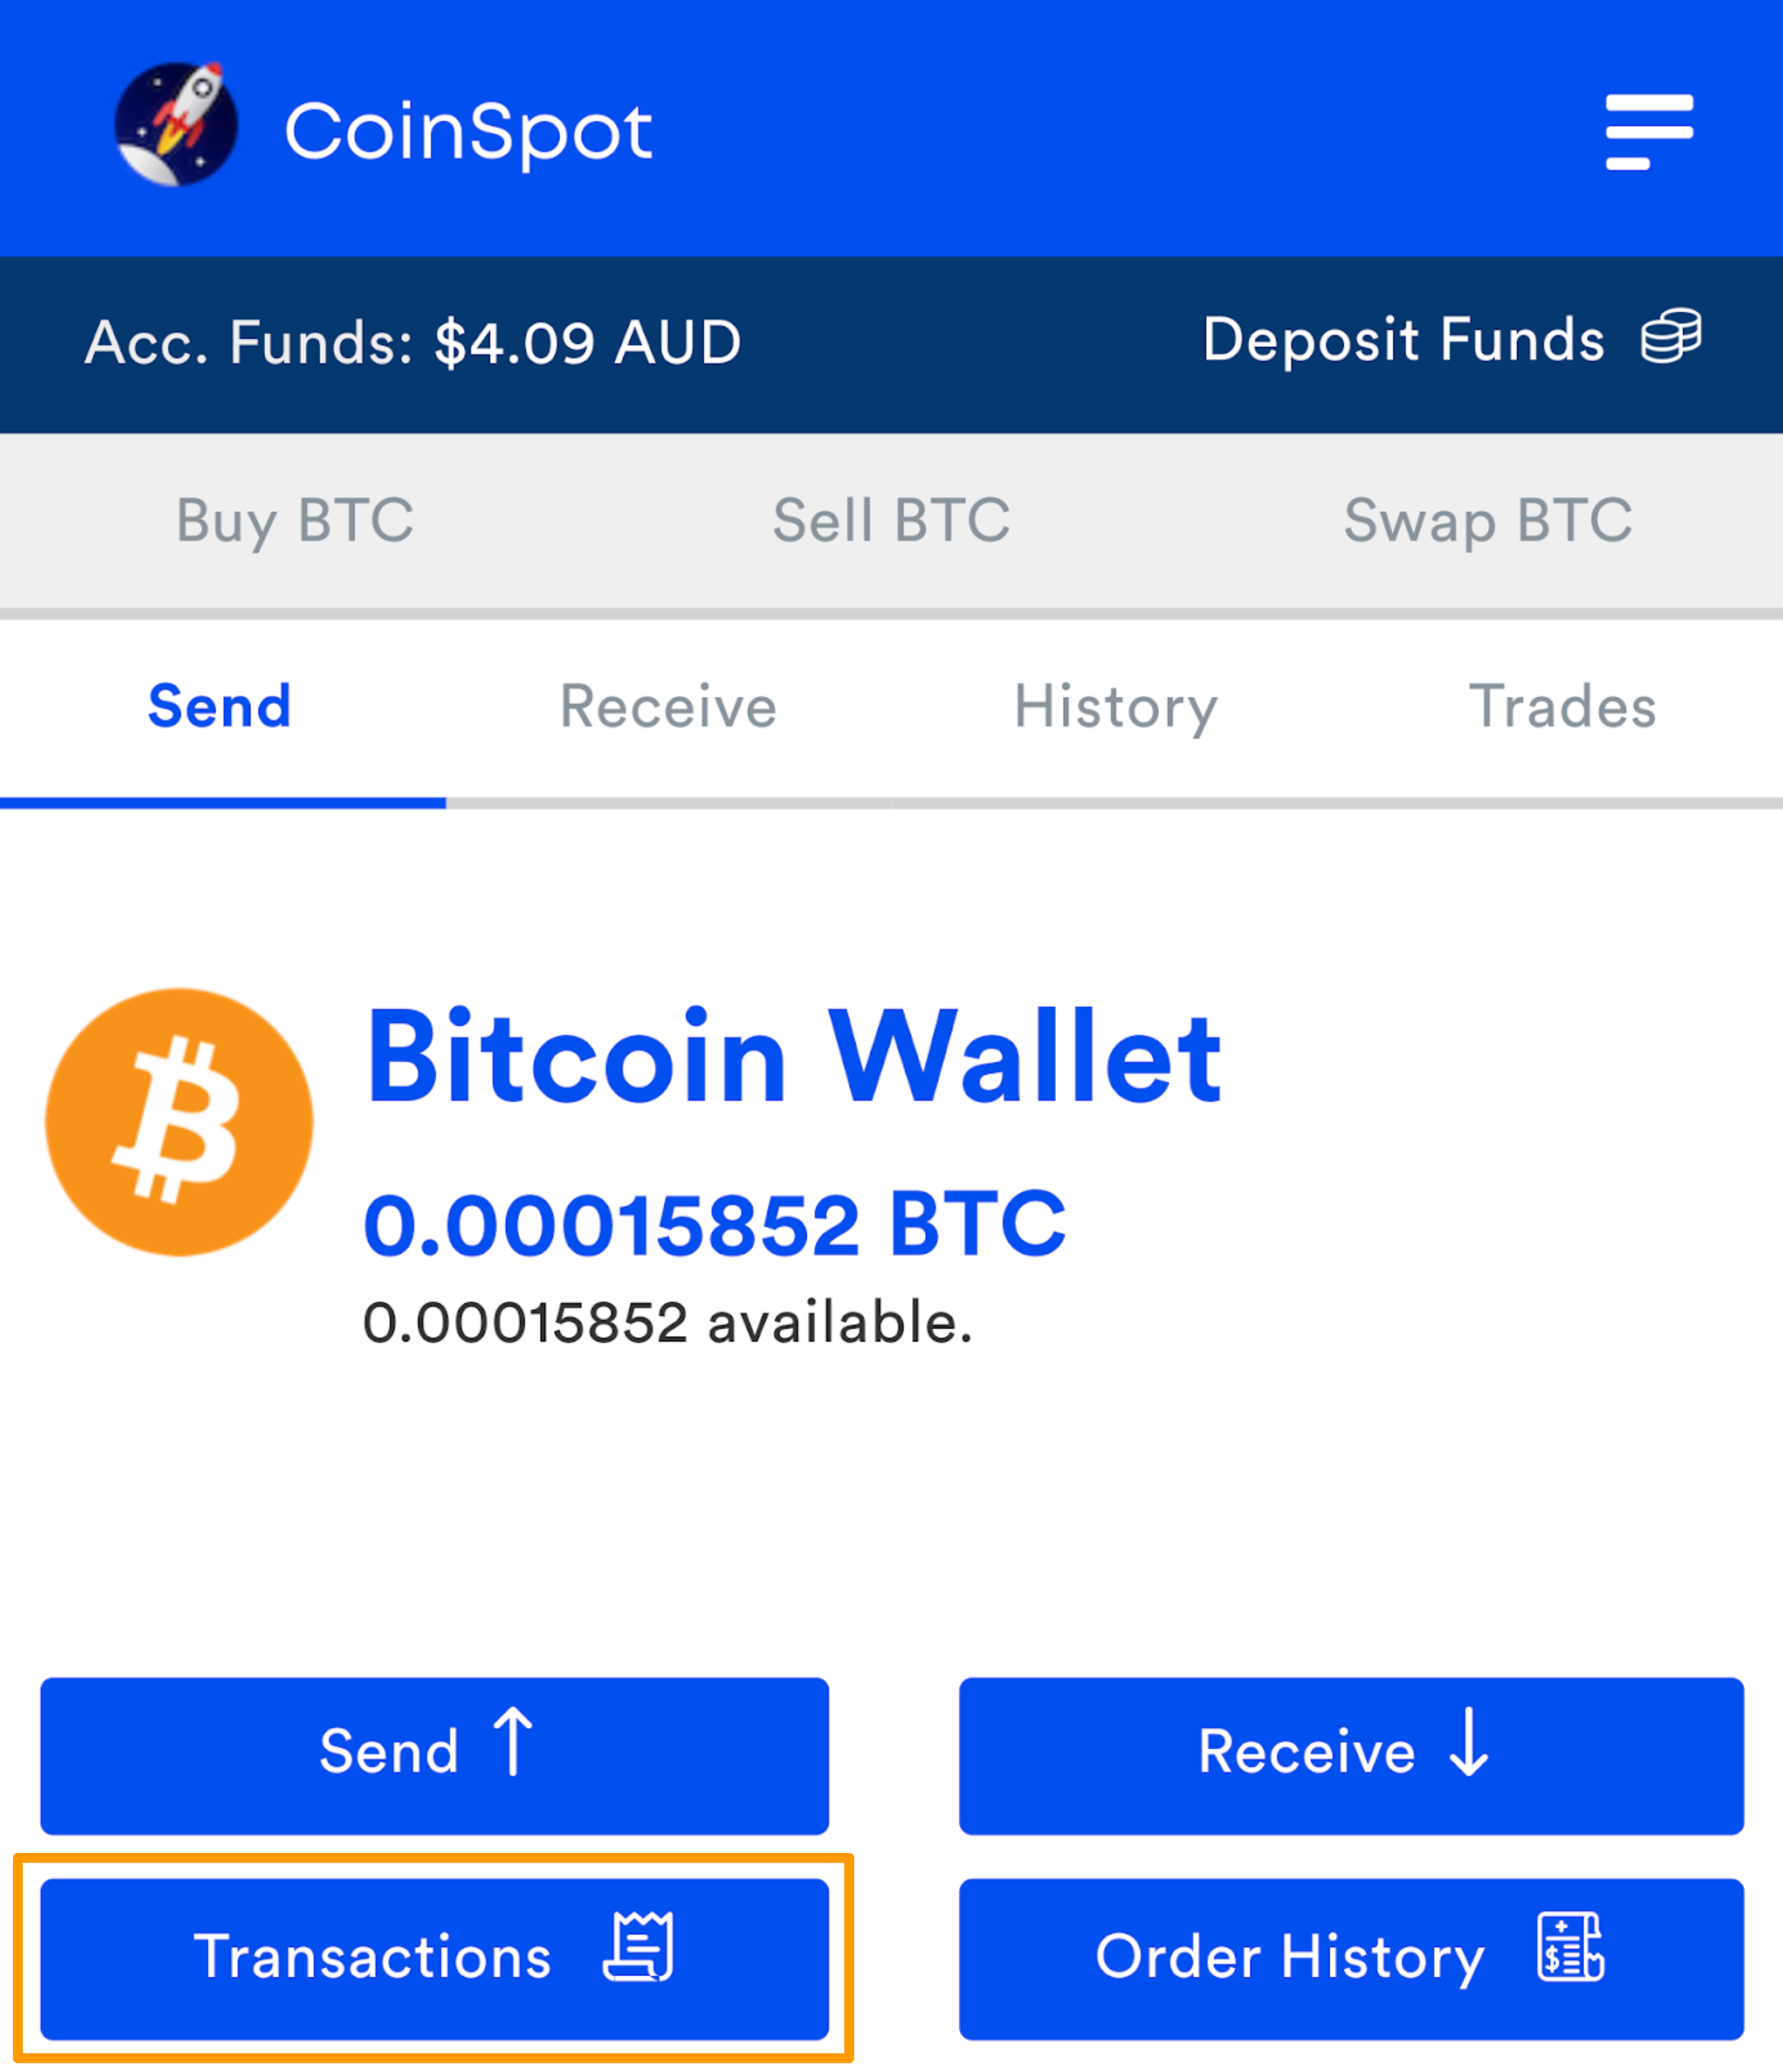 CoinSpot_Mobile_Web_Browser_-_Transactions_Page_v2.png